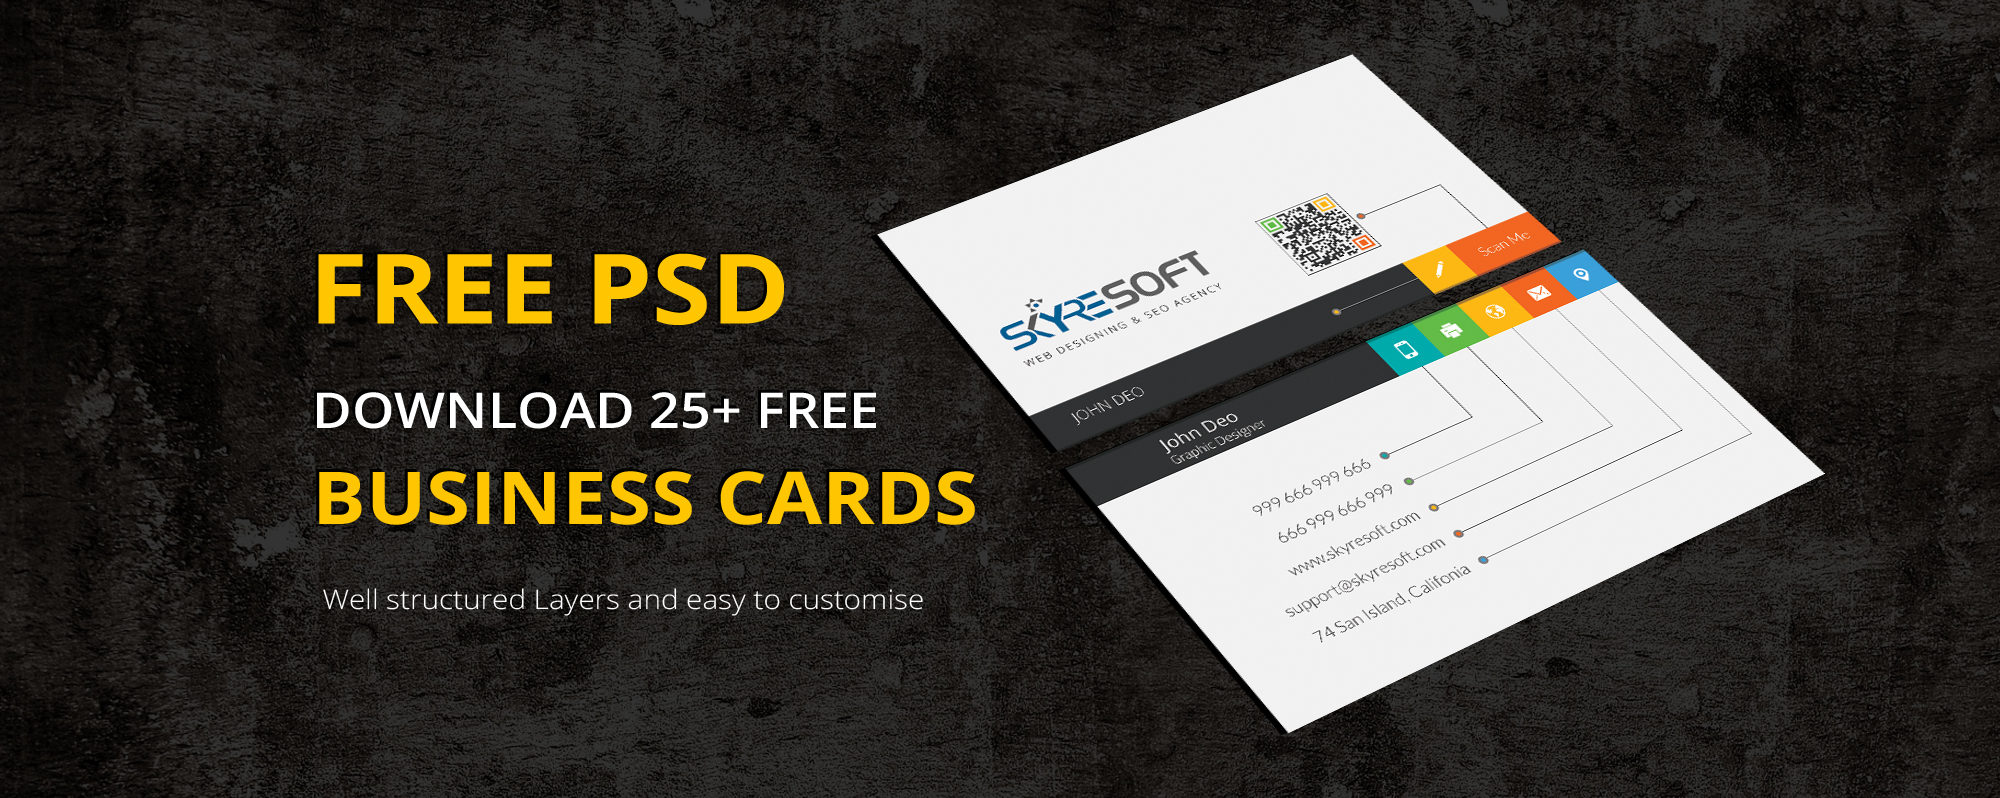 21 Creative Free PSD Business Card Templates 21 - Skyresoft Blog Within Web Design Business Cards Templates